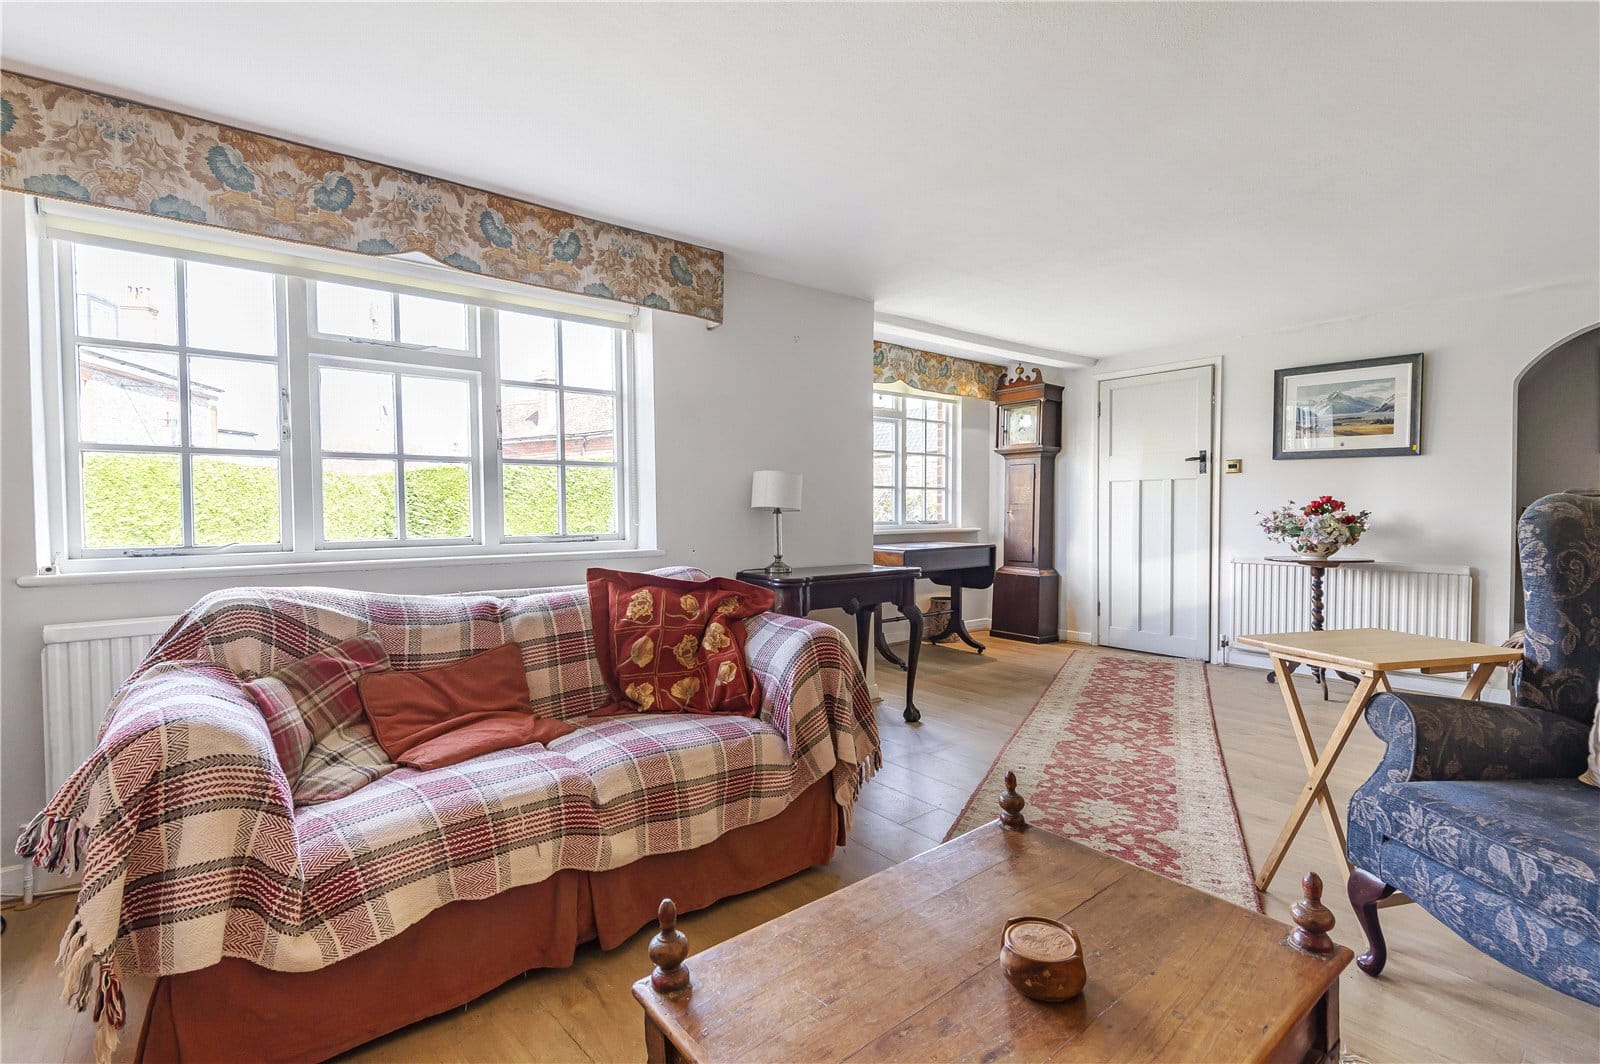 Church Lane, Ripe, Lewes, East Sussex | residential-sales